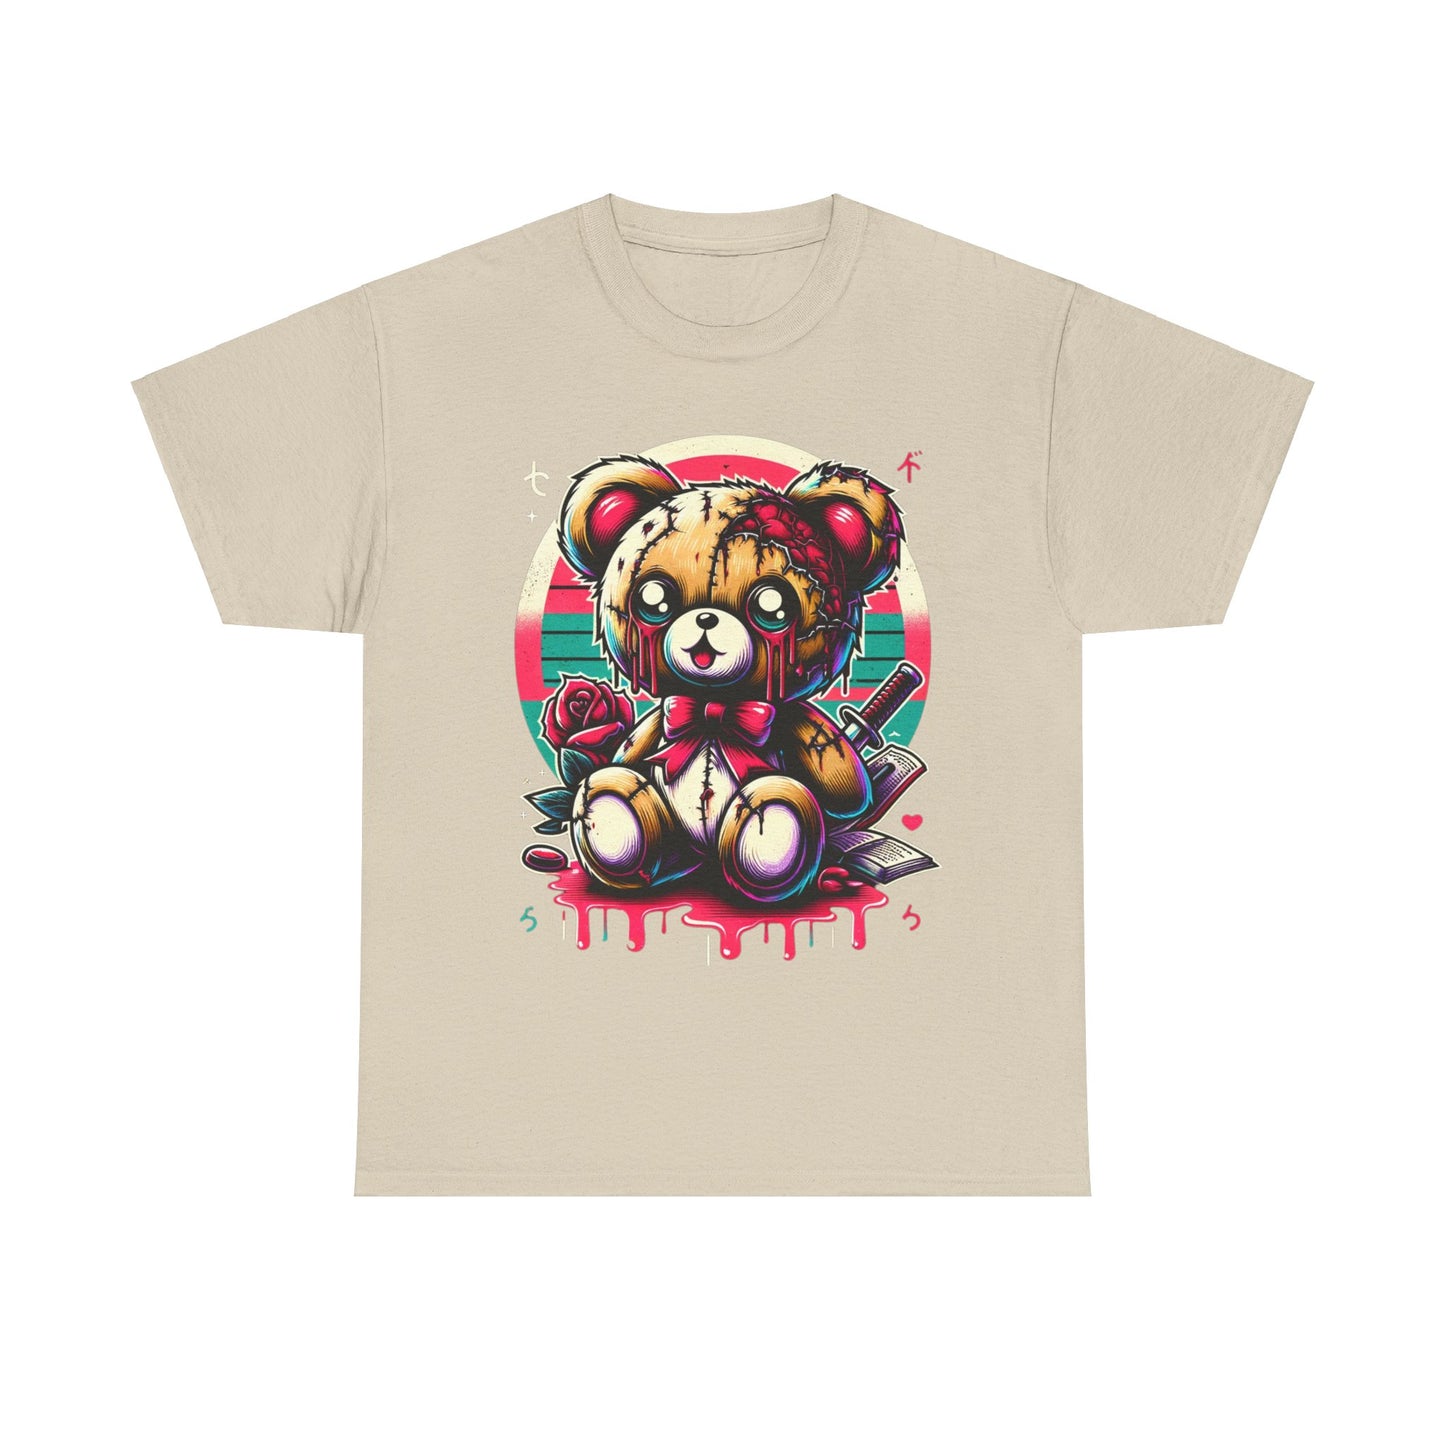 Buy 'Dead' Teddy Bear T-Shirt: A Unique Fusion of Anime and Pin-Up Style - Perfect for Art Lovers!